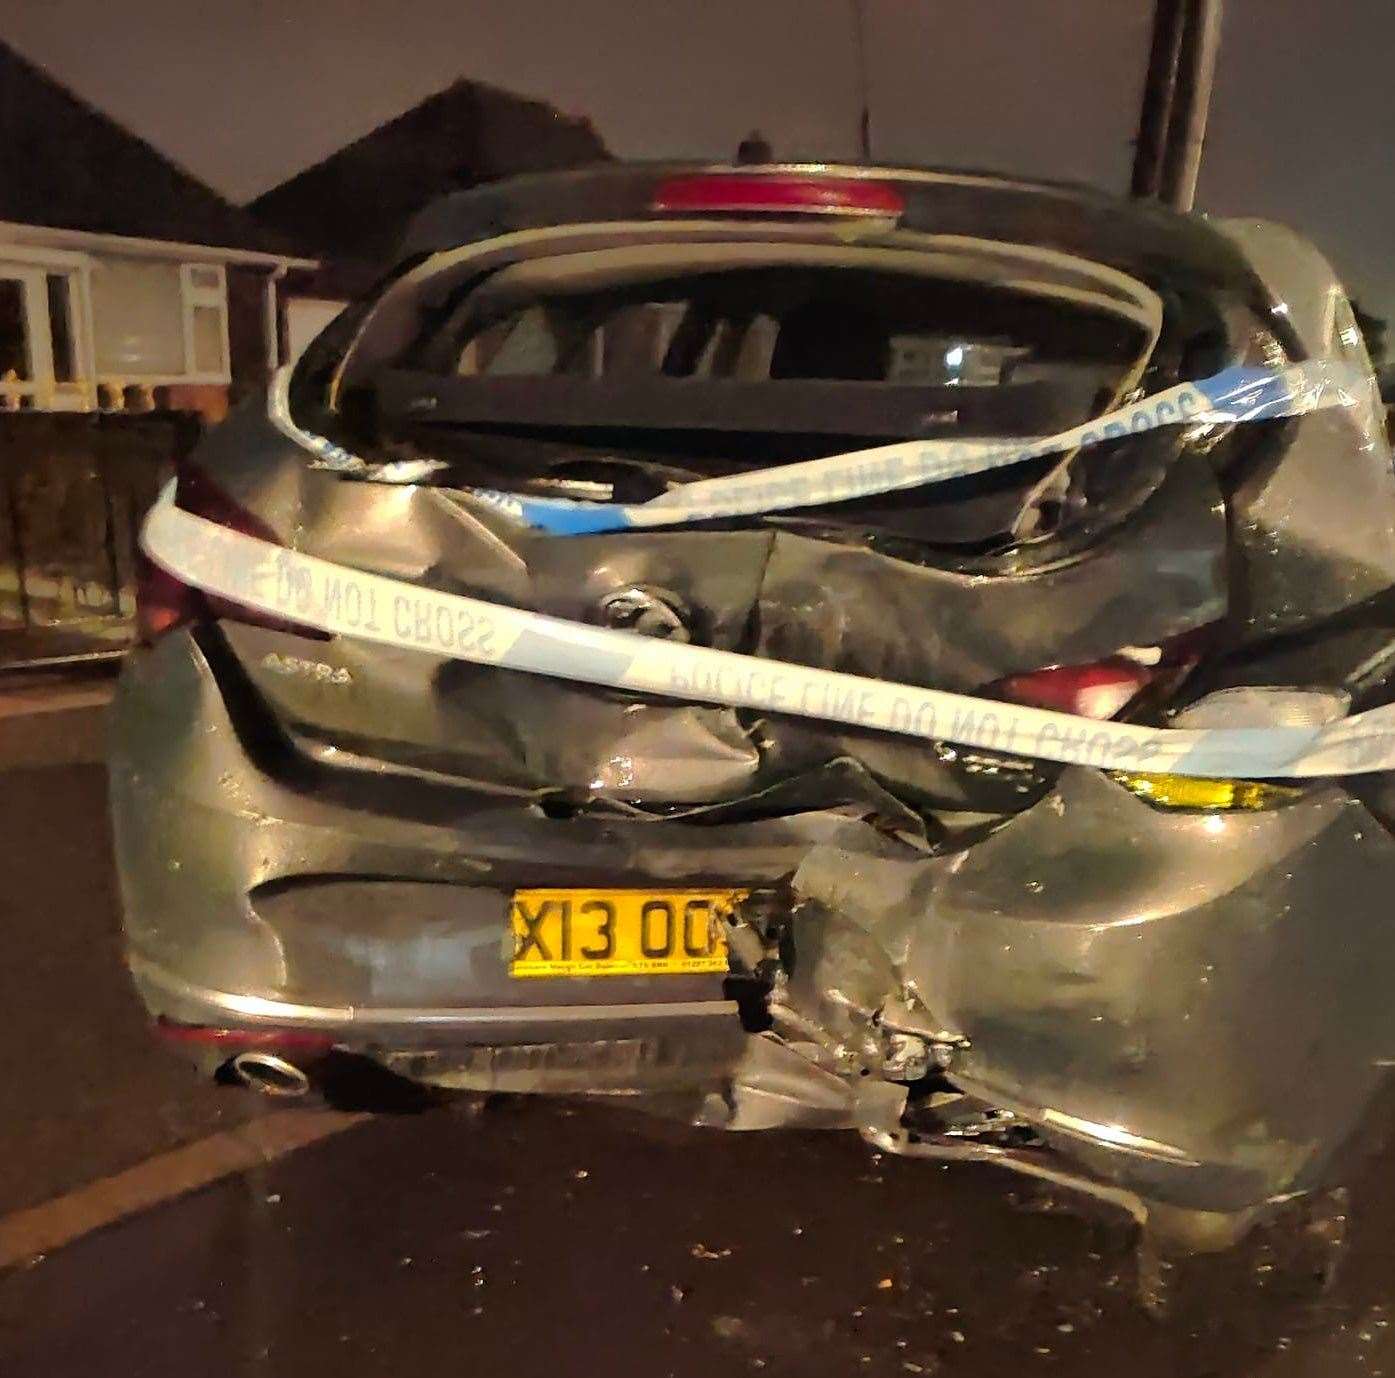 A man has been arrested following the crash in Mickleburgh Hill, Herne Bay